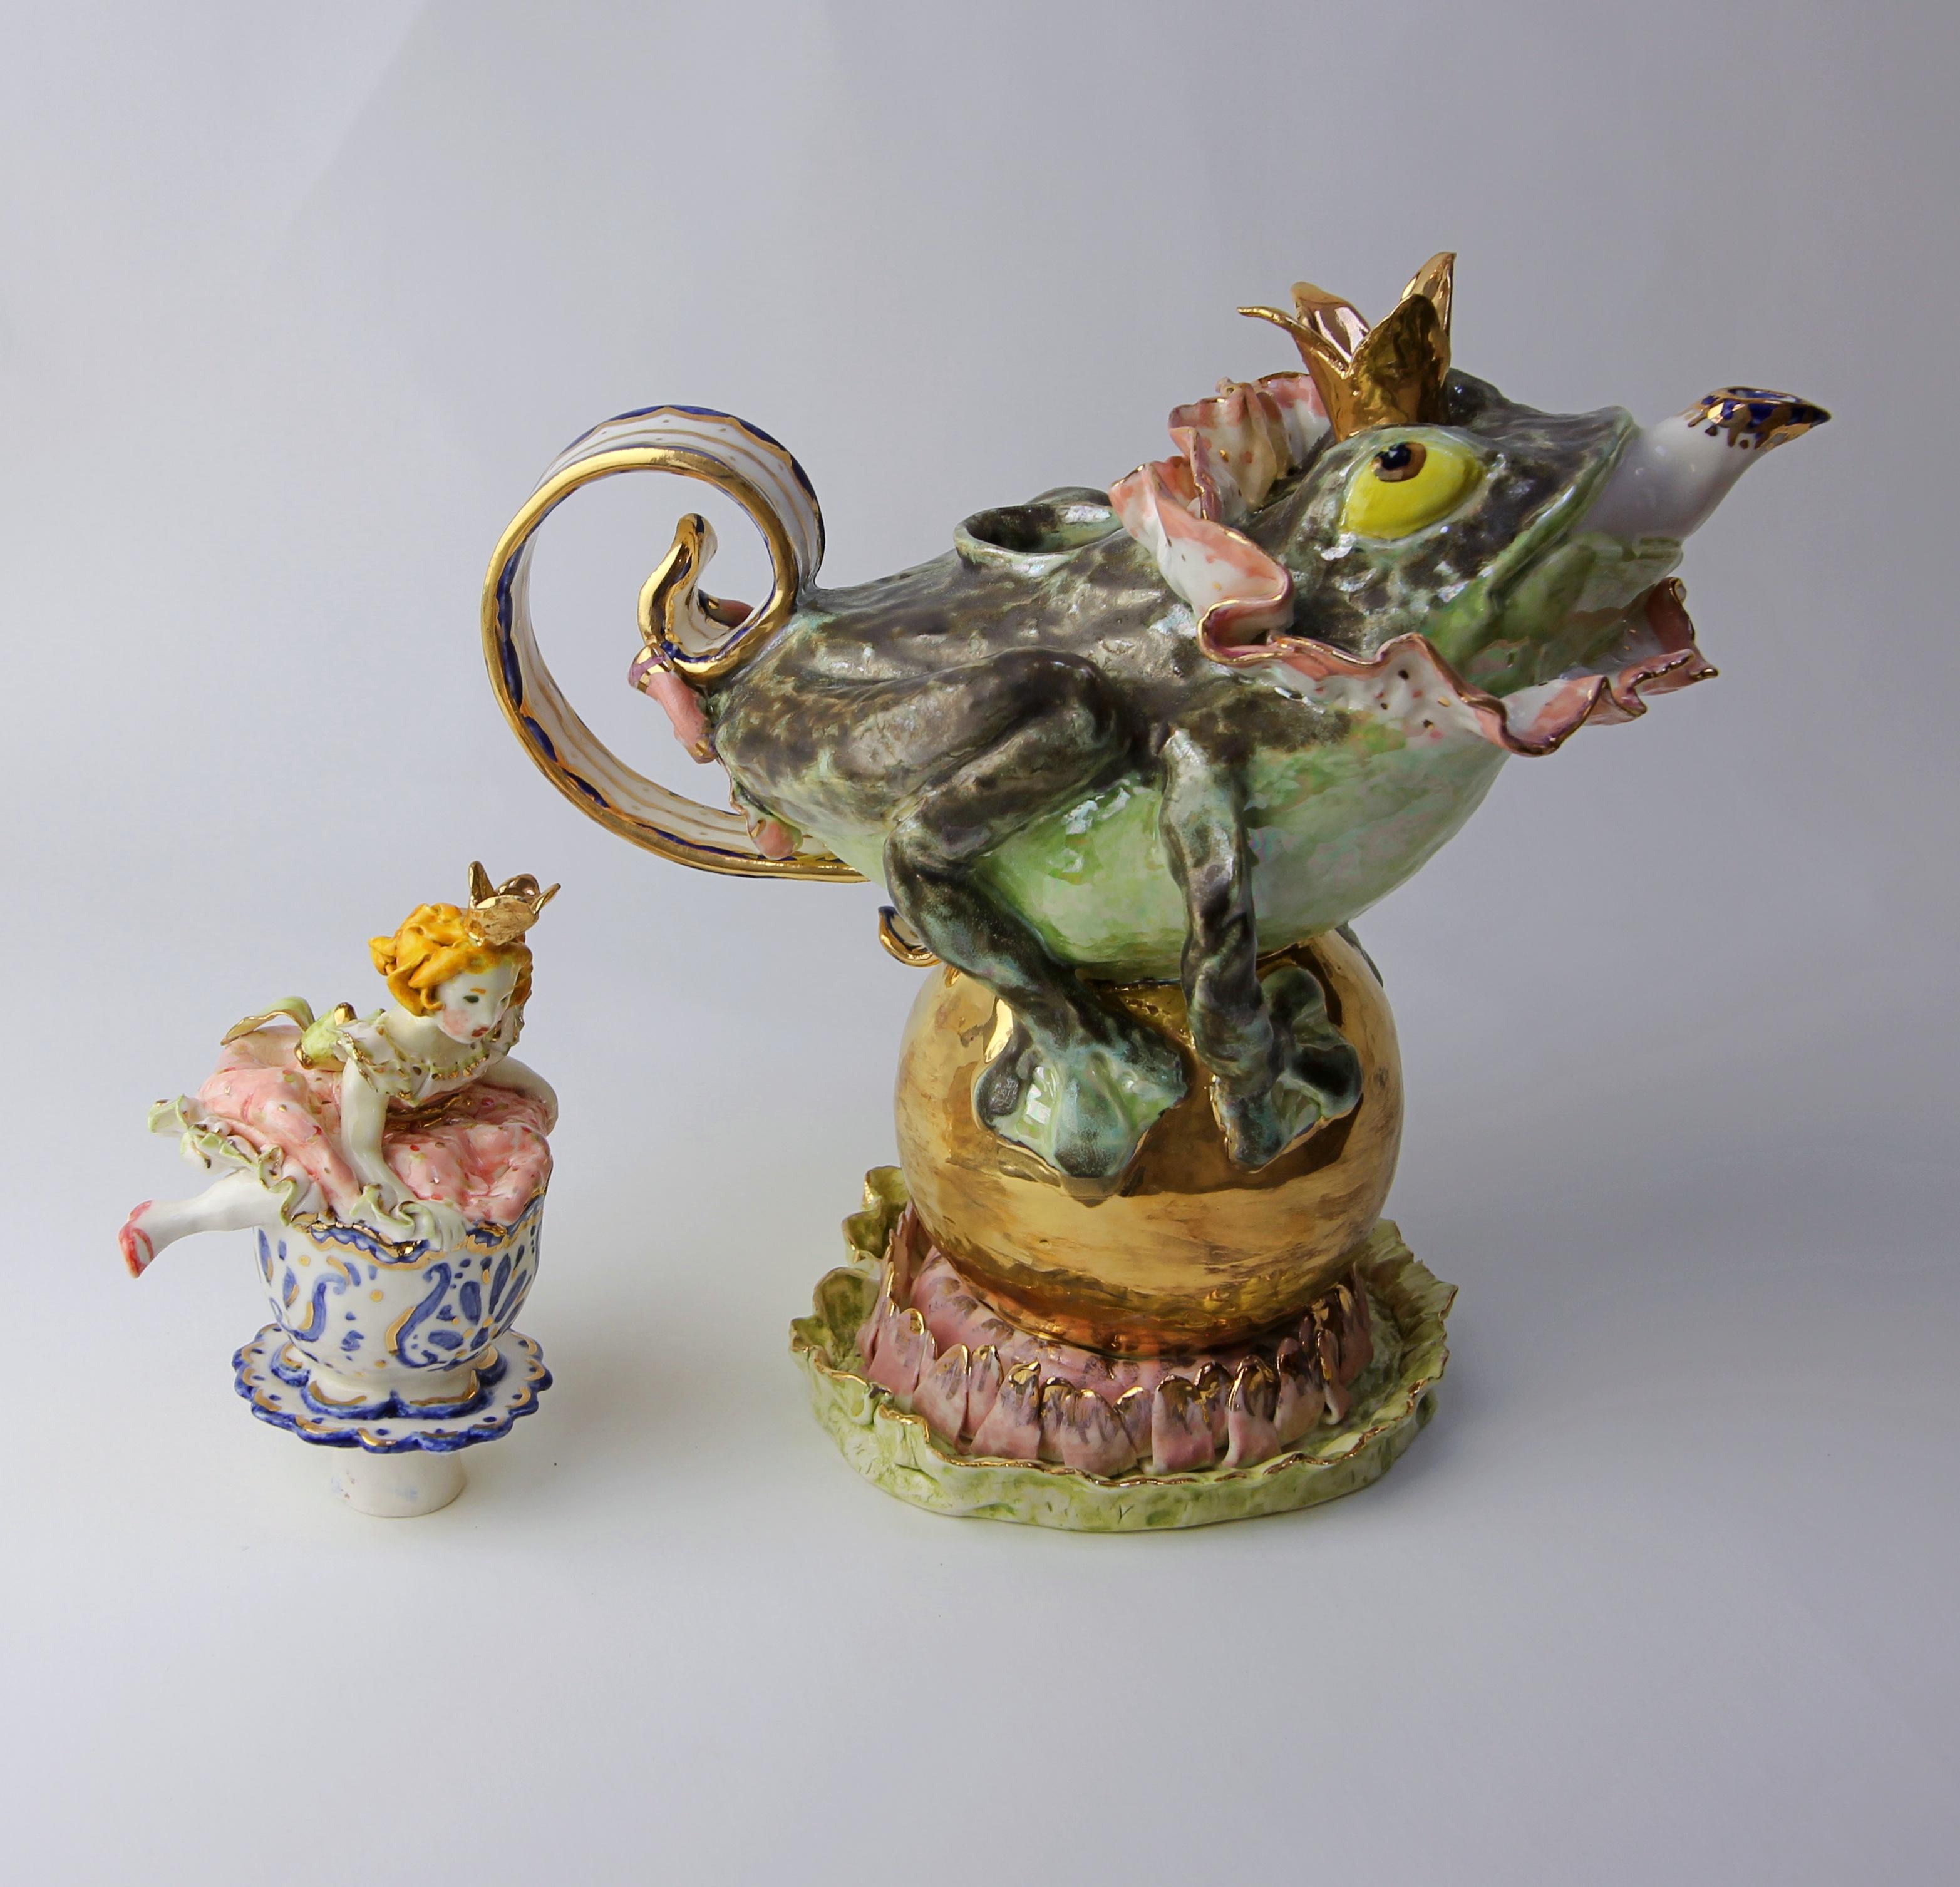 Italian The Frog Prince Porcelain Piece, Handmade in Italy, Handcrafted Design 2021 For Sale